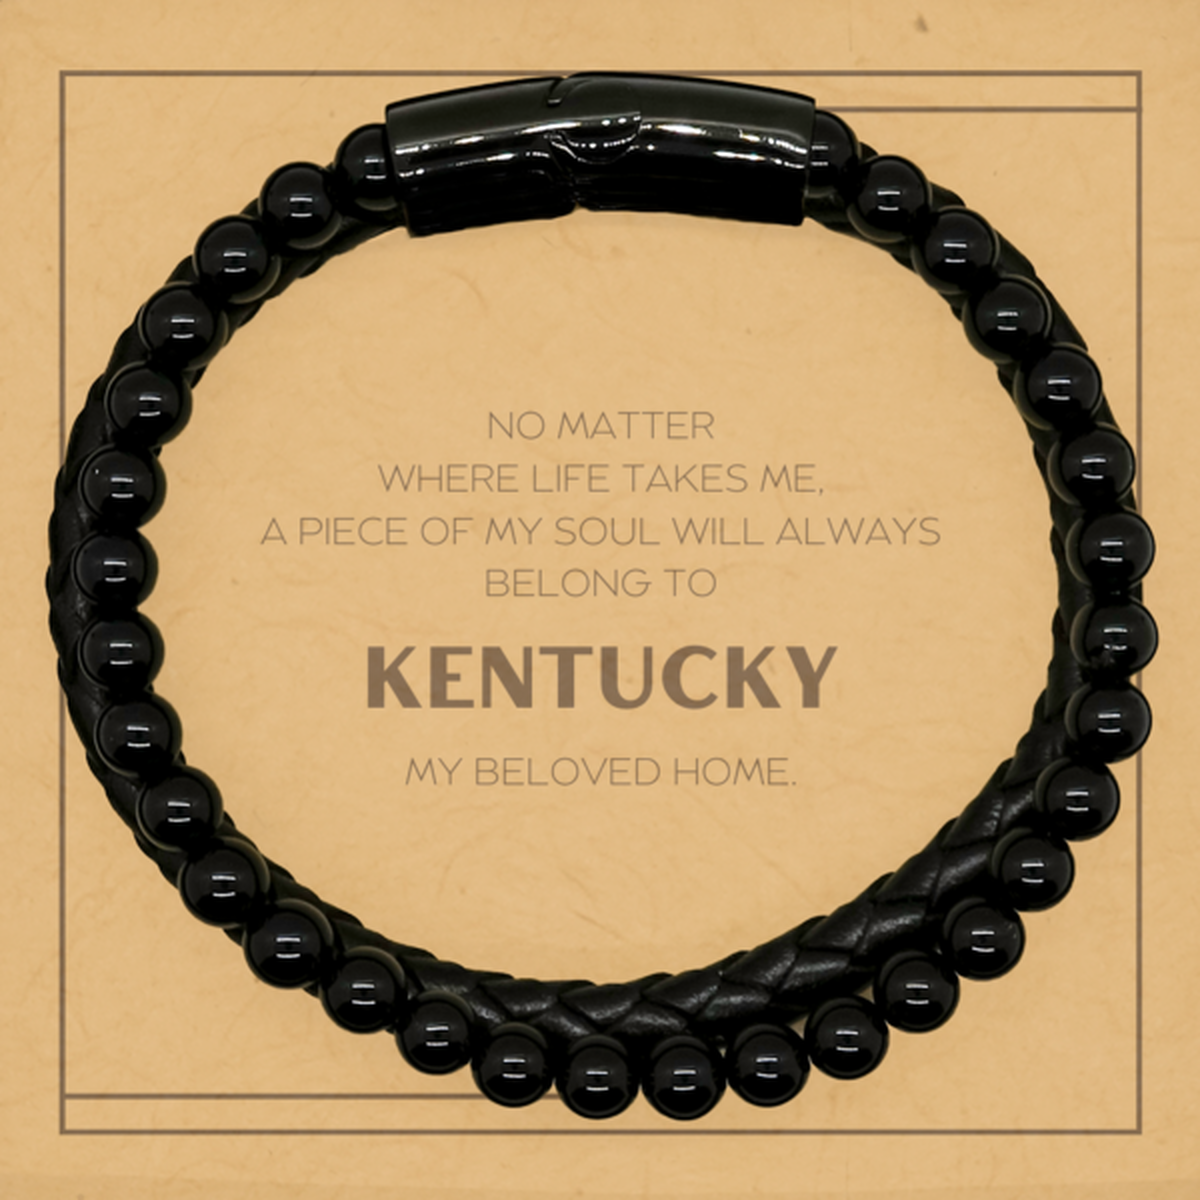 Love Kentucky State Gifts, My soul will always belong to Kentucky, Proud Stone Leather Bracelets, Birthday Unique Gifts For Kentucky Men, Women, Friends